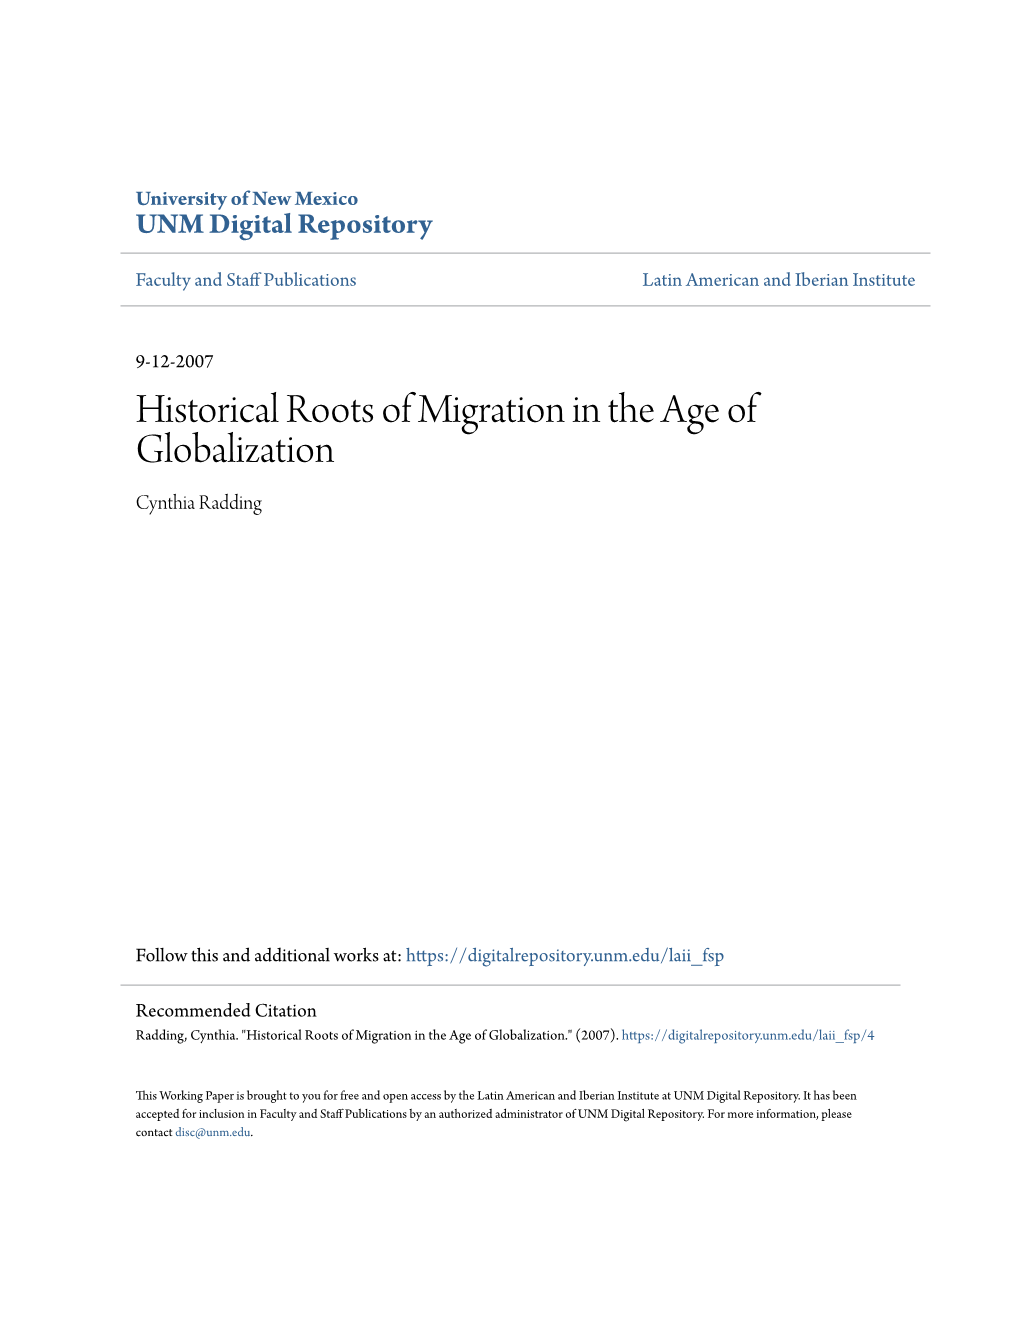 Historical Roots of Migration in the Age of Globalization Cynthia Radding